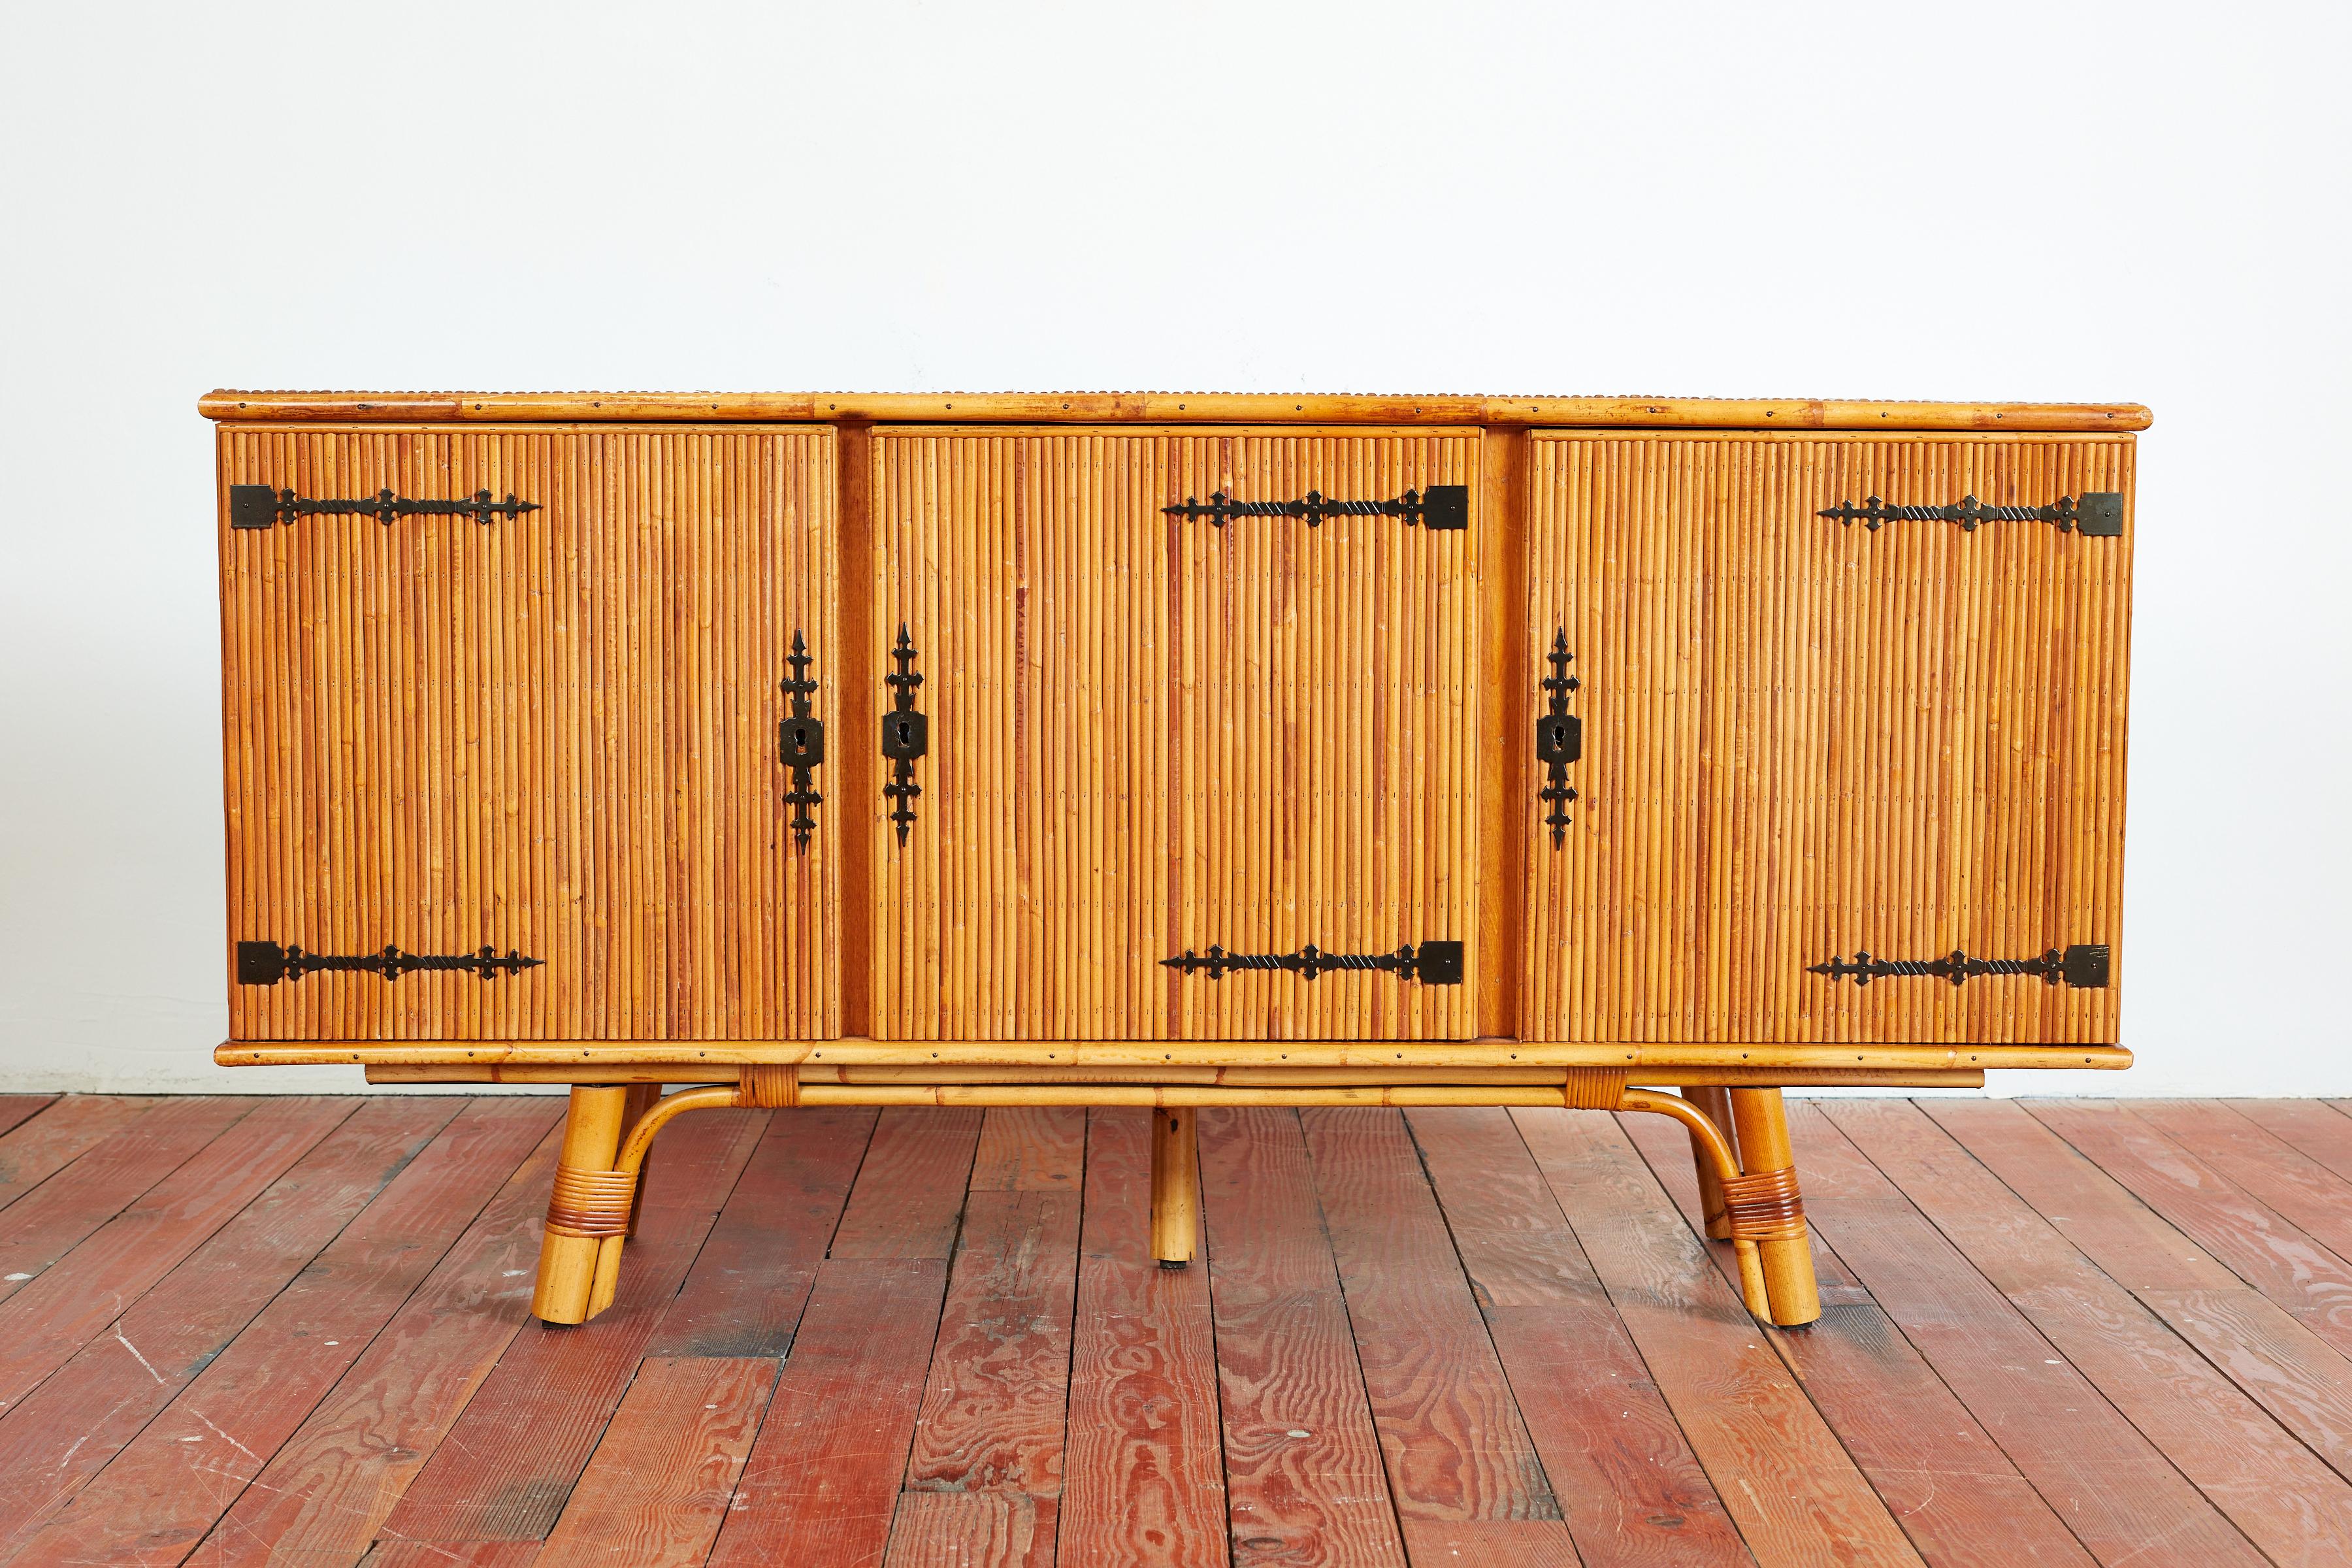 Beautiful split bamboo sideboard by Adrien Audoux and Frida Minet
France, 1950s.
Three-door cabinet with intricate wrought iron hinges, interior shelves for storage  and original key. 
Bamboo legs with rattan wrapped detail.
Wonderful patina